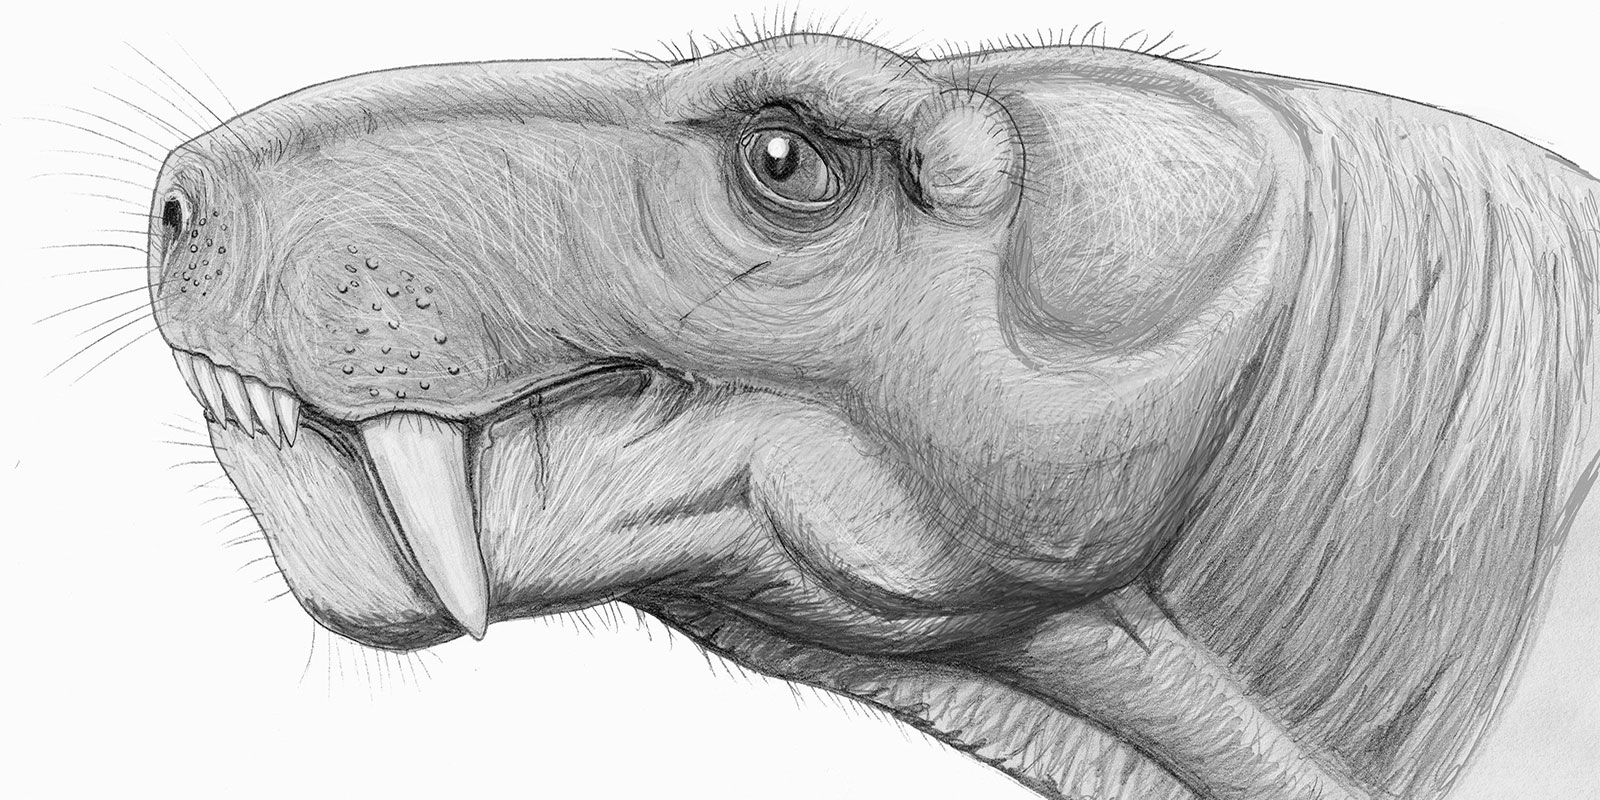 illustration of the animal's head from the side